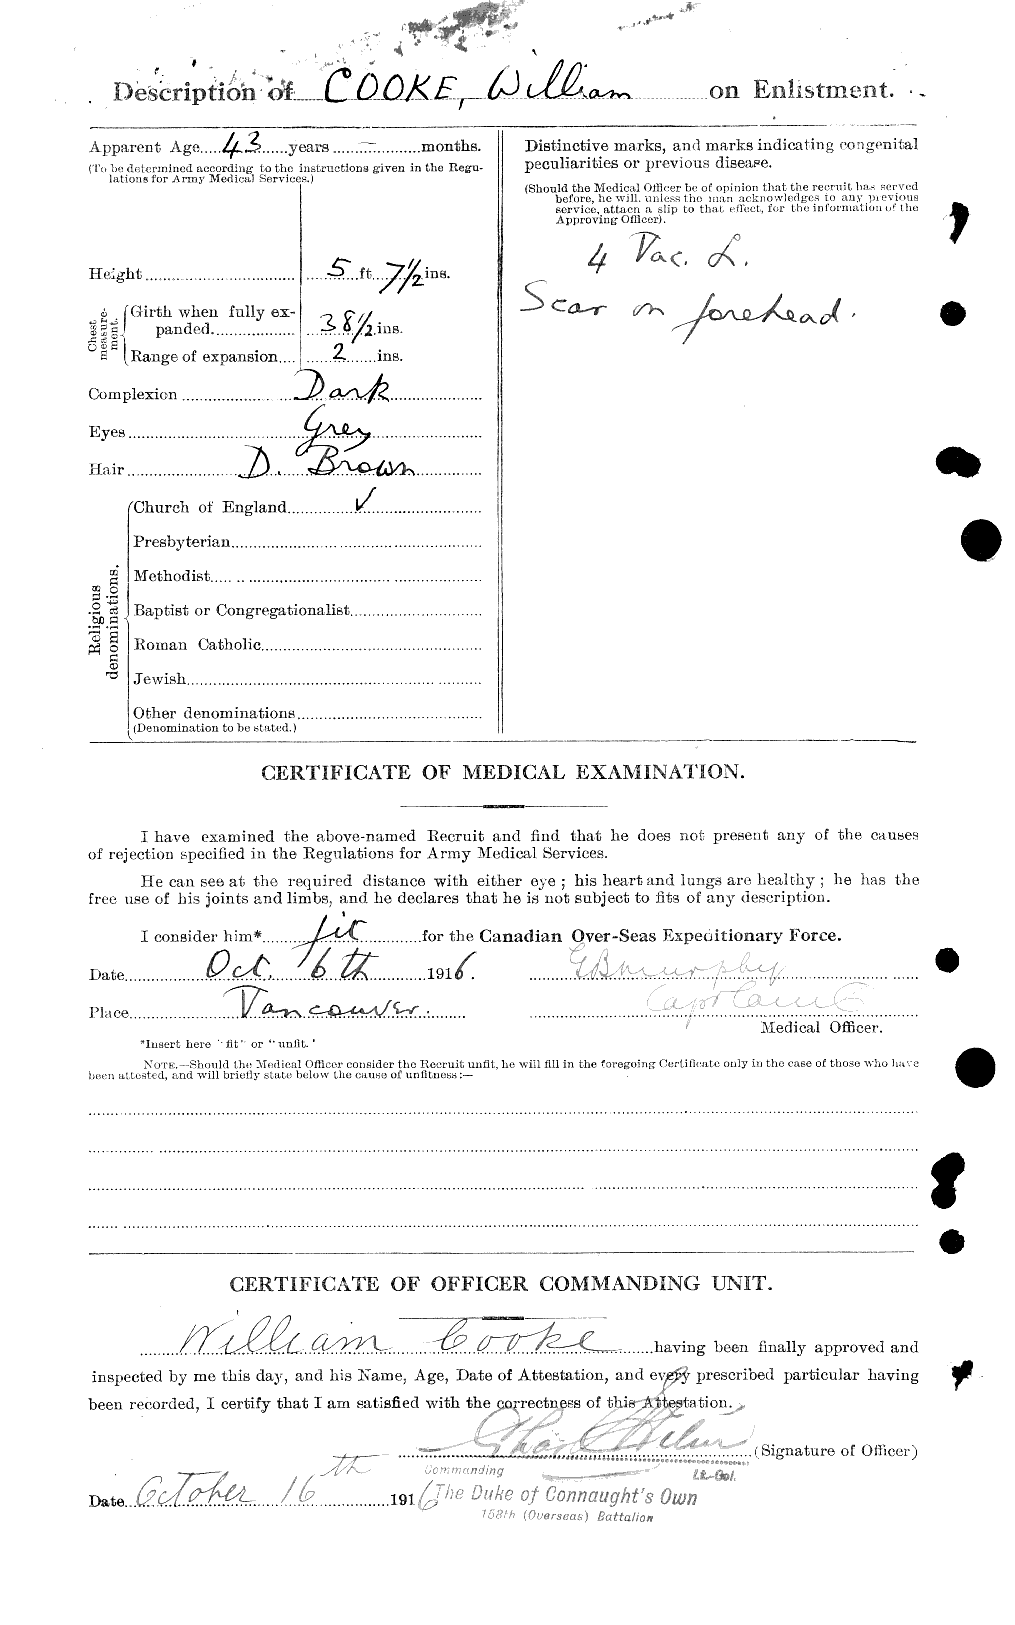 Personnel Records of the First World War - CEF 039104b